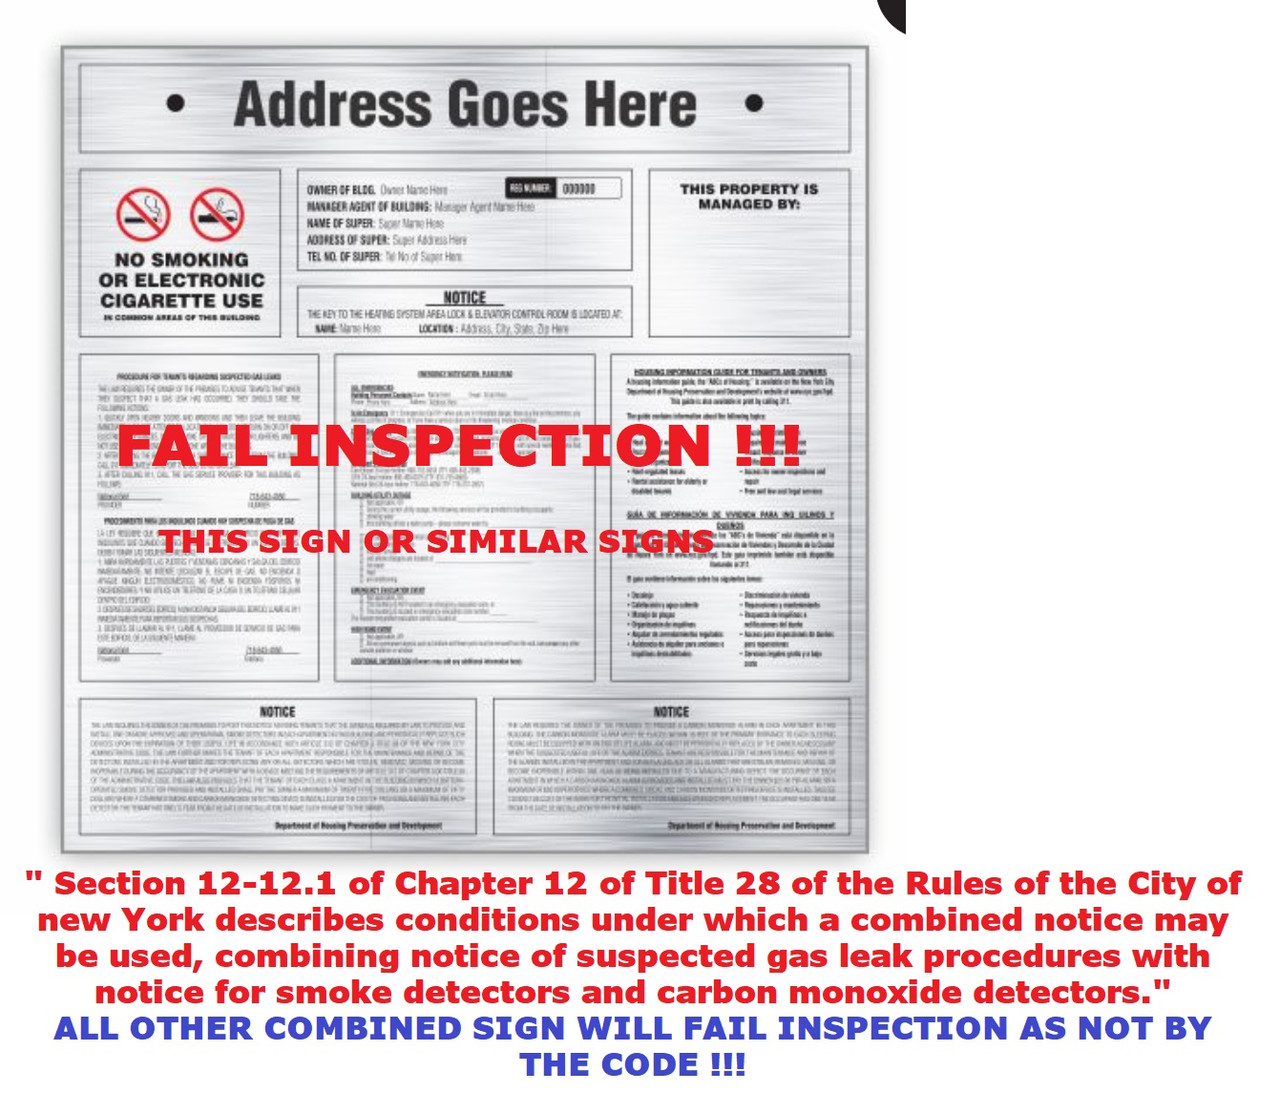  90-Day Mechanical and Federal Annual Inspection Form